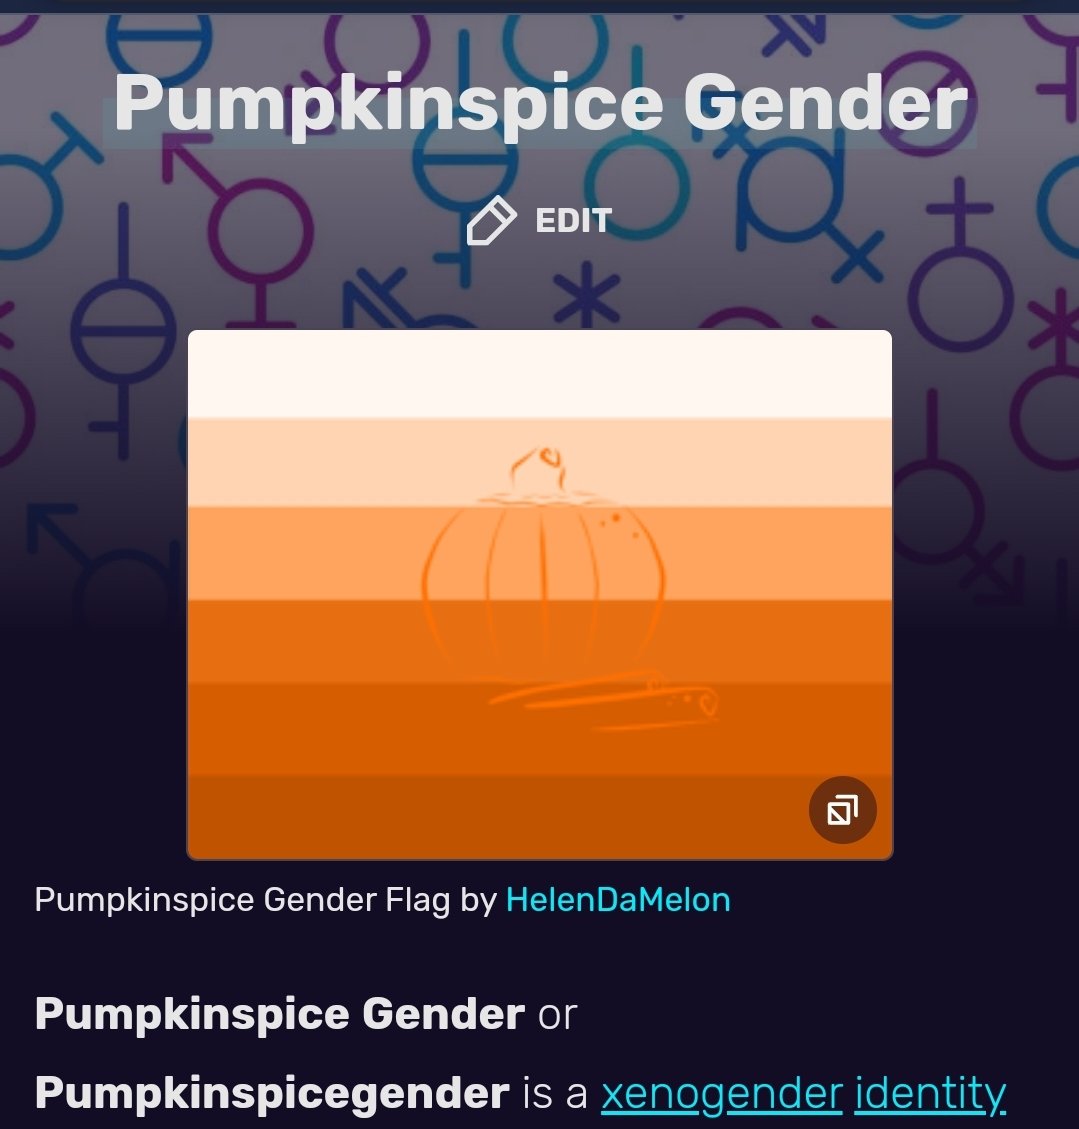 Pumpkin Spice pronouns aka 'Pumpkinspice gender'

Look, IDGAF what you do as an adult BUT I'm not calling you pumpkinspice or roachself or dragon kin or whatever the fuck. 

You are not a Starbucks coffee...even needing to type that makes me feel dumber.